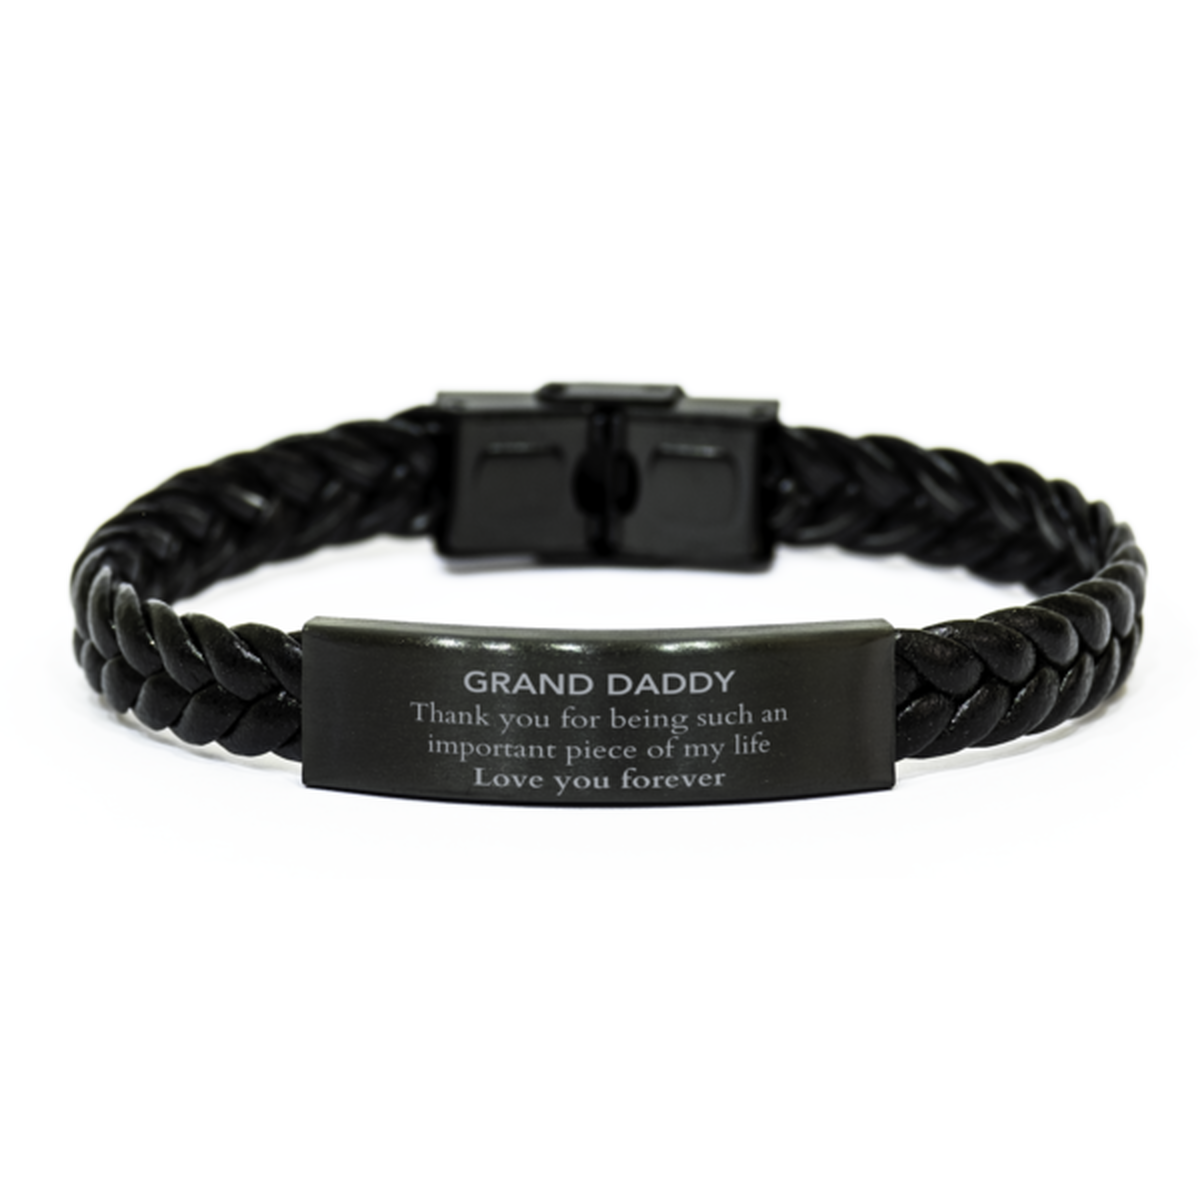 Appropriate Grand Daddy Braided Leather Bracelet Epic Birthday Gifts for Grand Daddy Thank you for being such an important piece of my life Grand Daddy Christmas Mothers Fathers Day